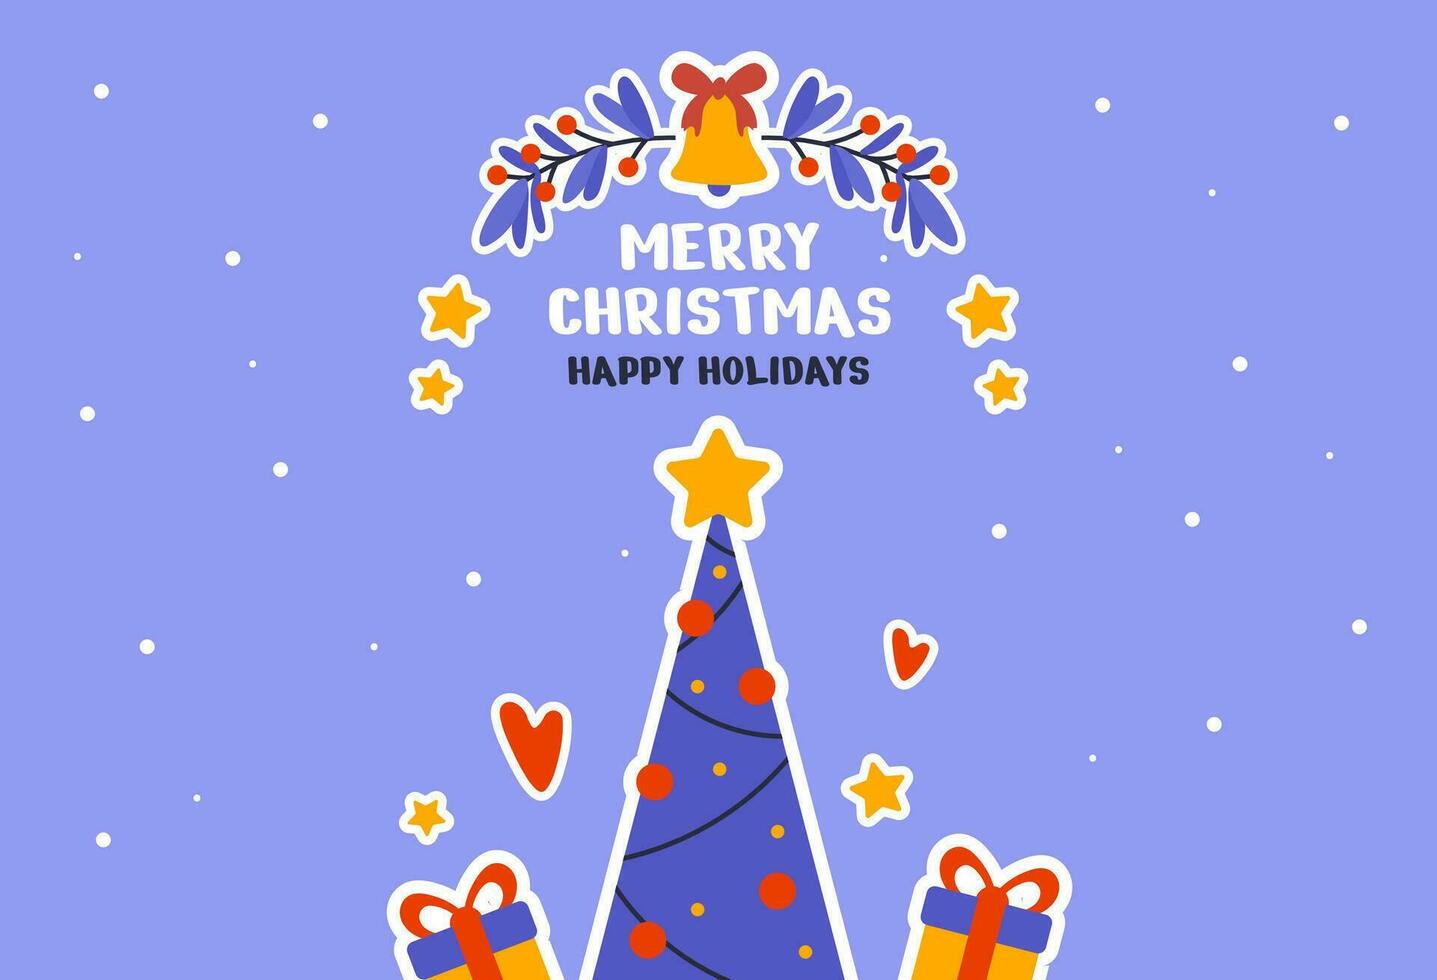 Happy new year and Merry Christmas holiday card. Postcard templates with Christmas tree, gifts, socks, Christmas sticks. vector